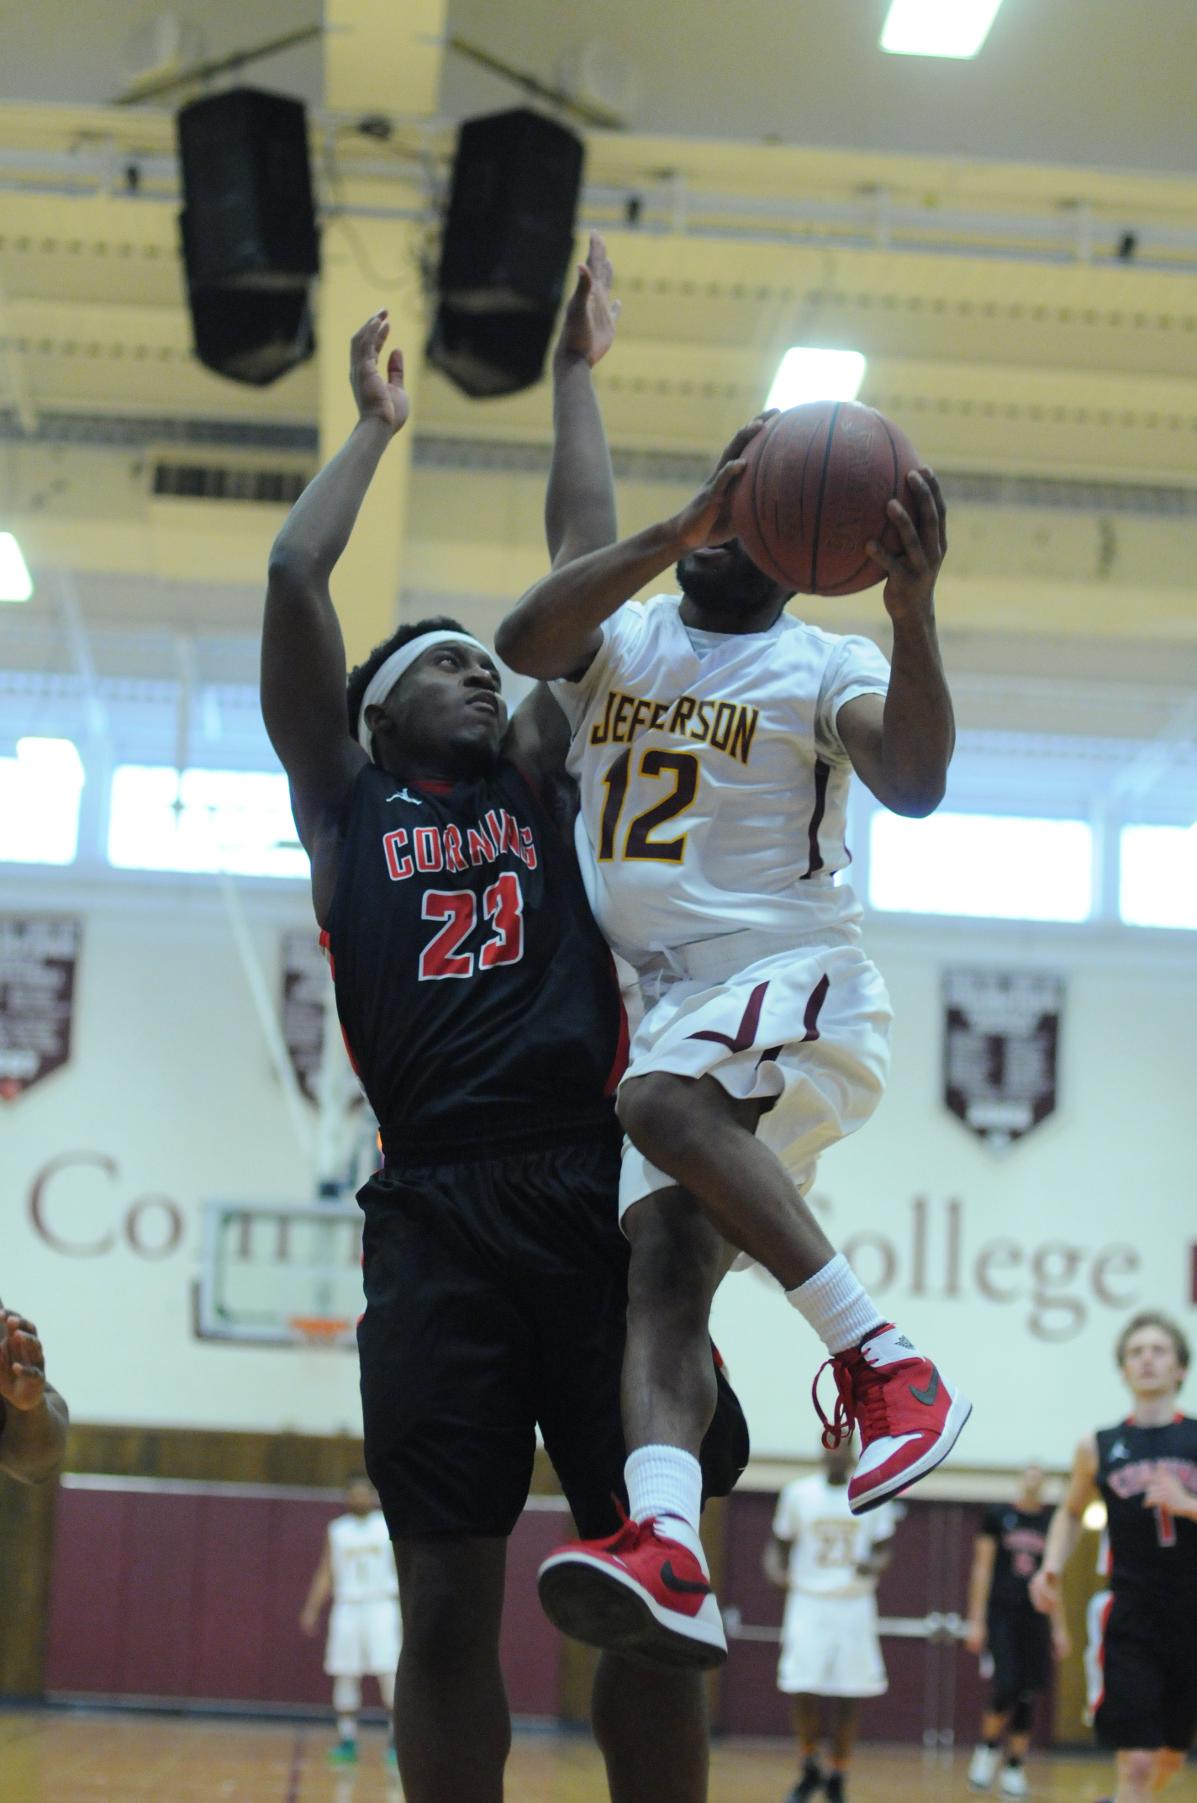 Cannoneers Lose Close Battle to Finger Lakes in MSAC Championship Game.